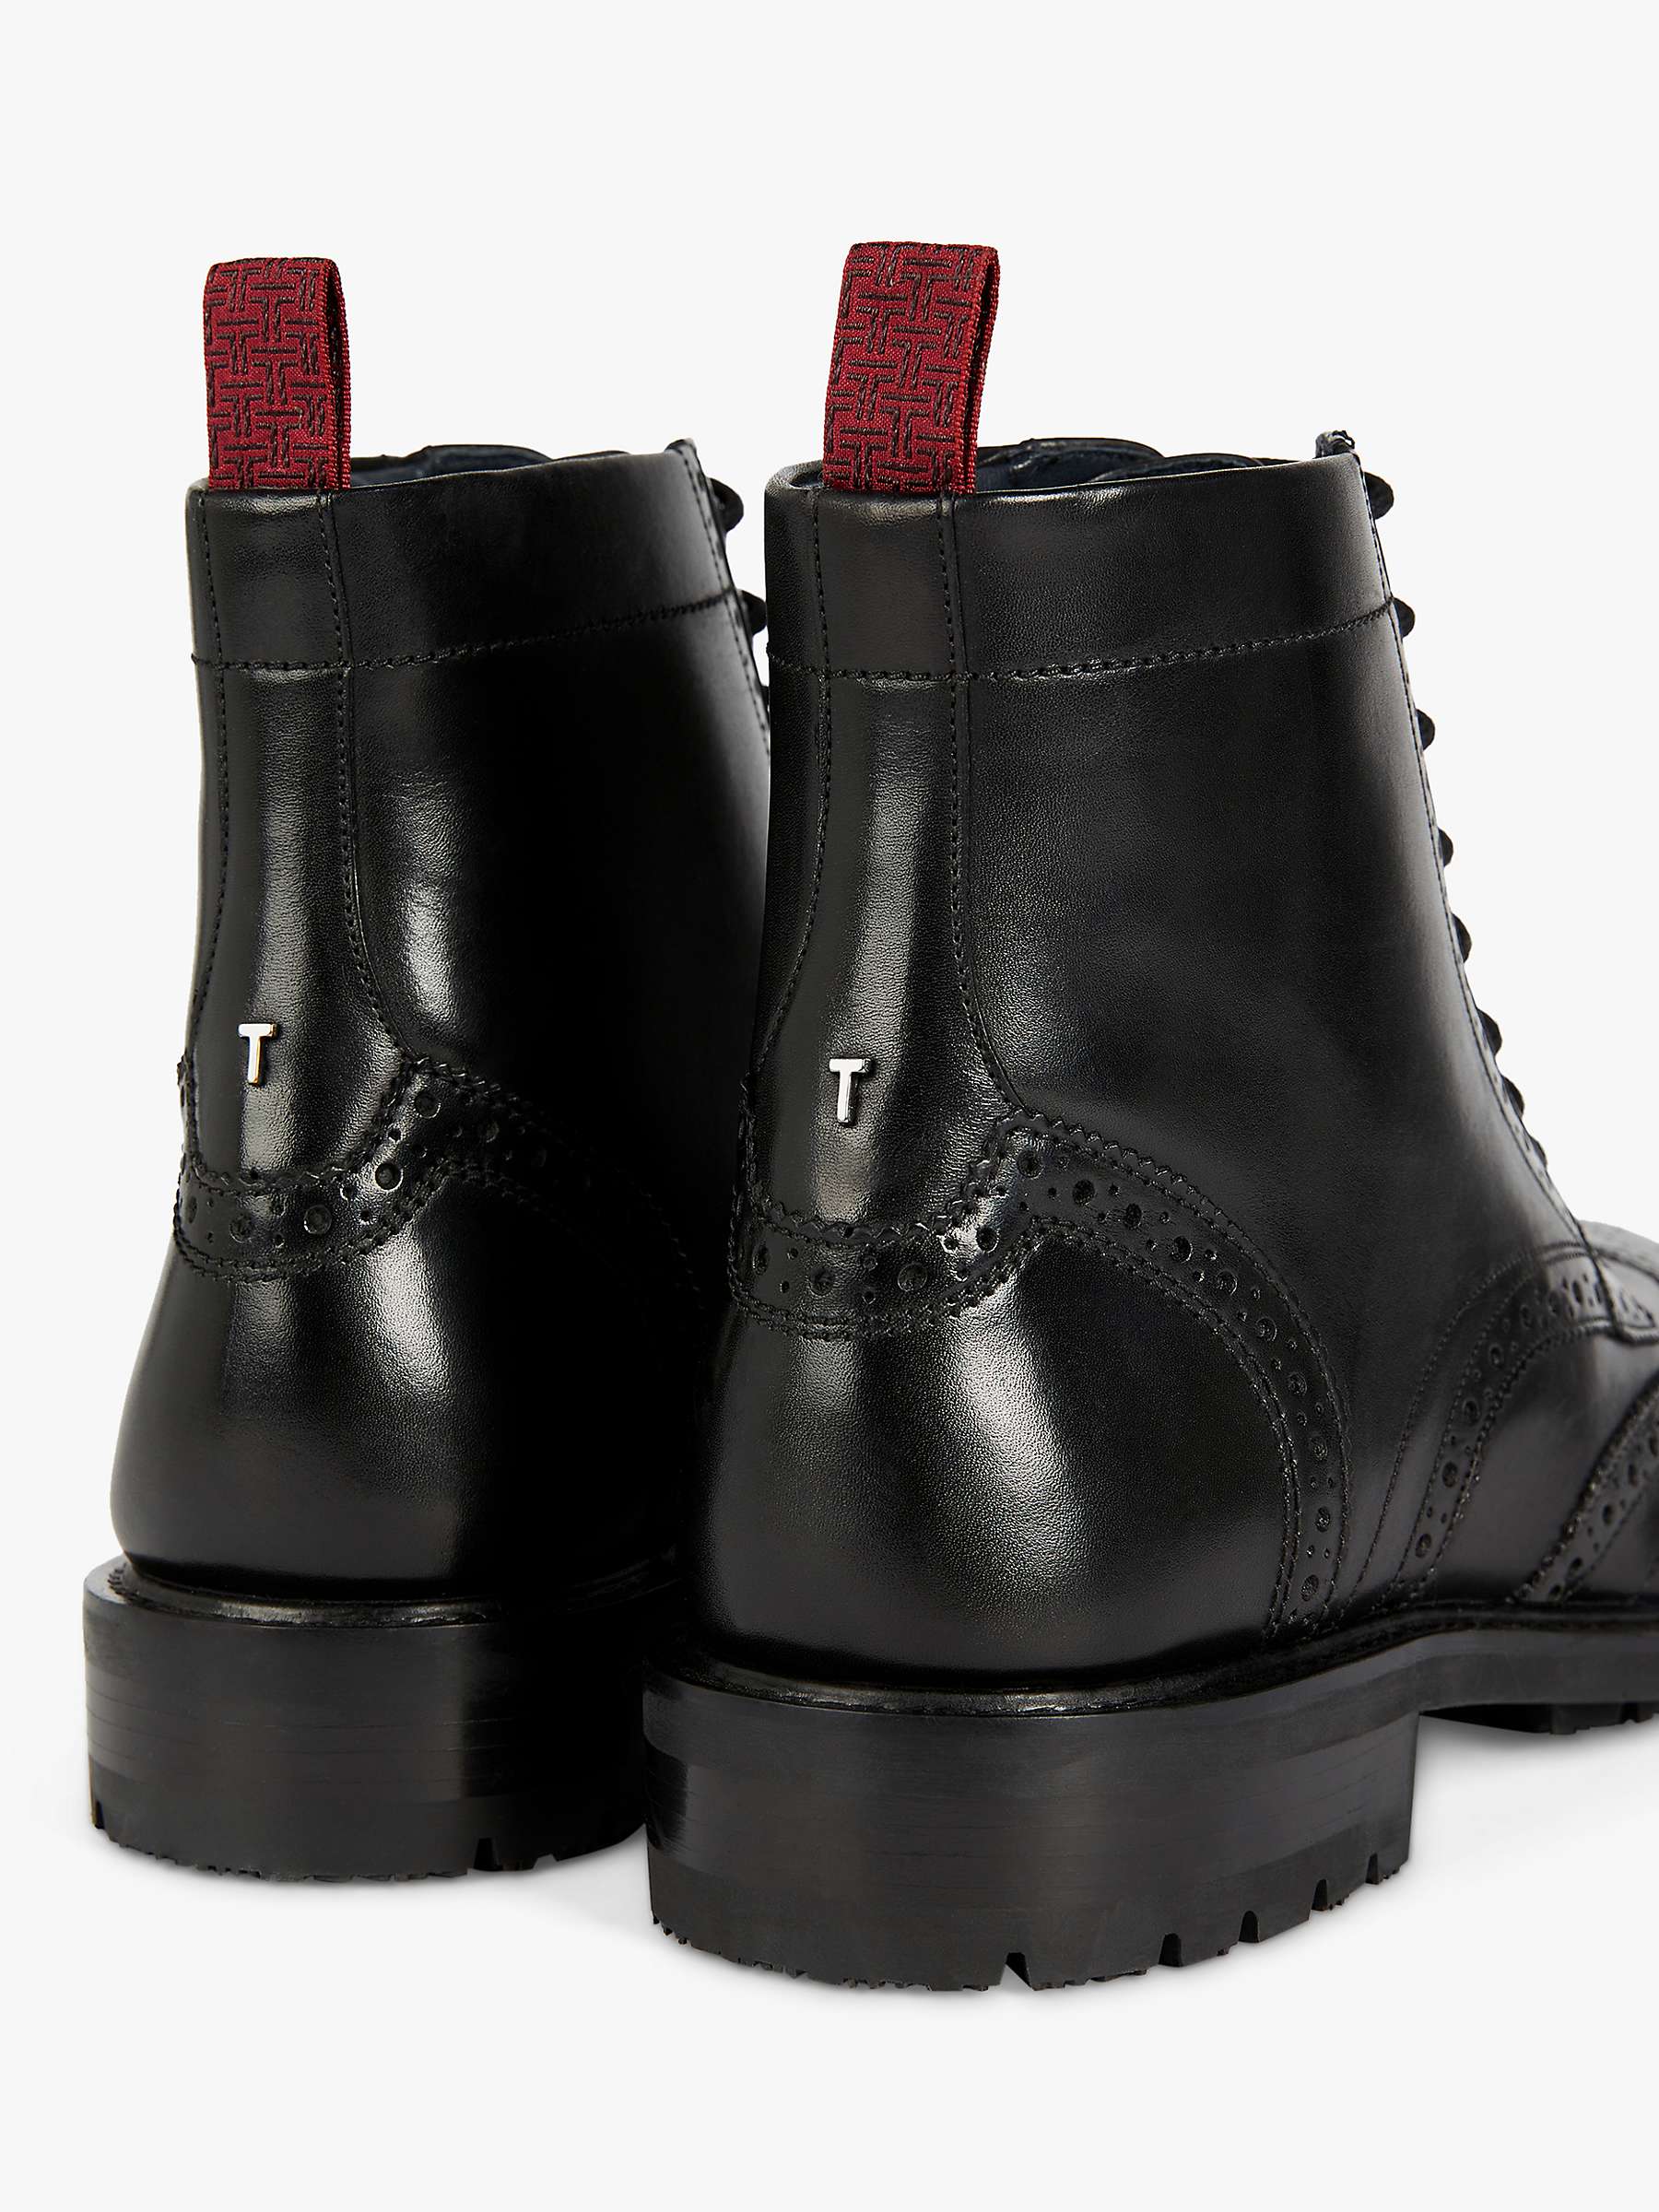 Buy Ted Baker Wadelan Leather Lace Up Boots Online at johnlewis.com